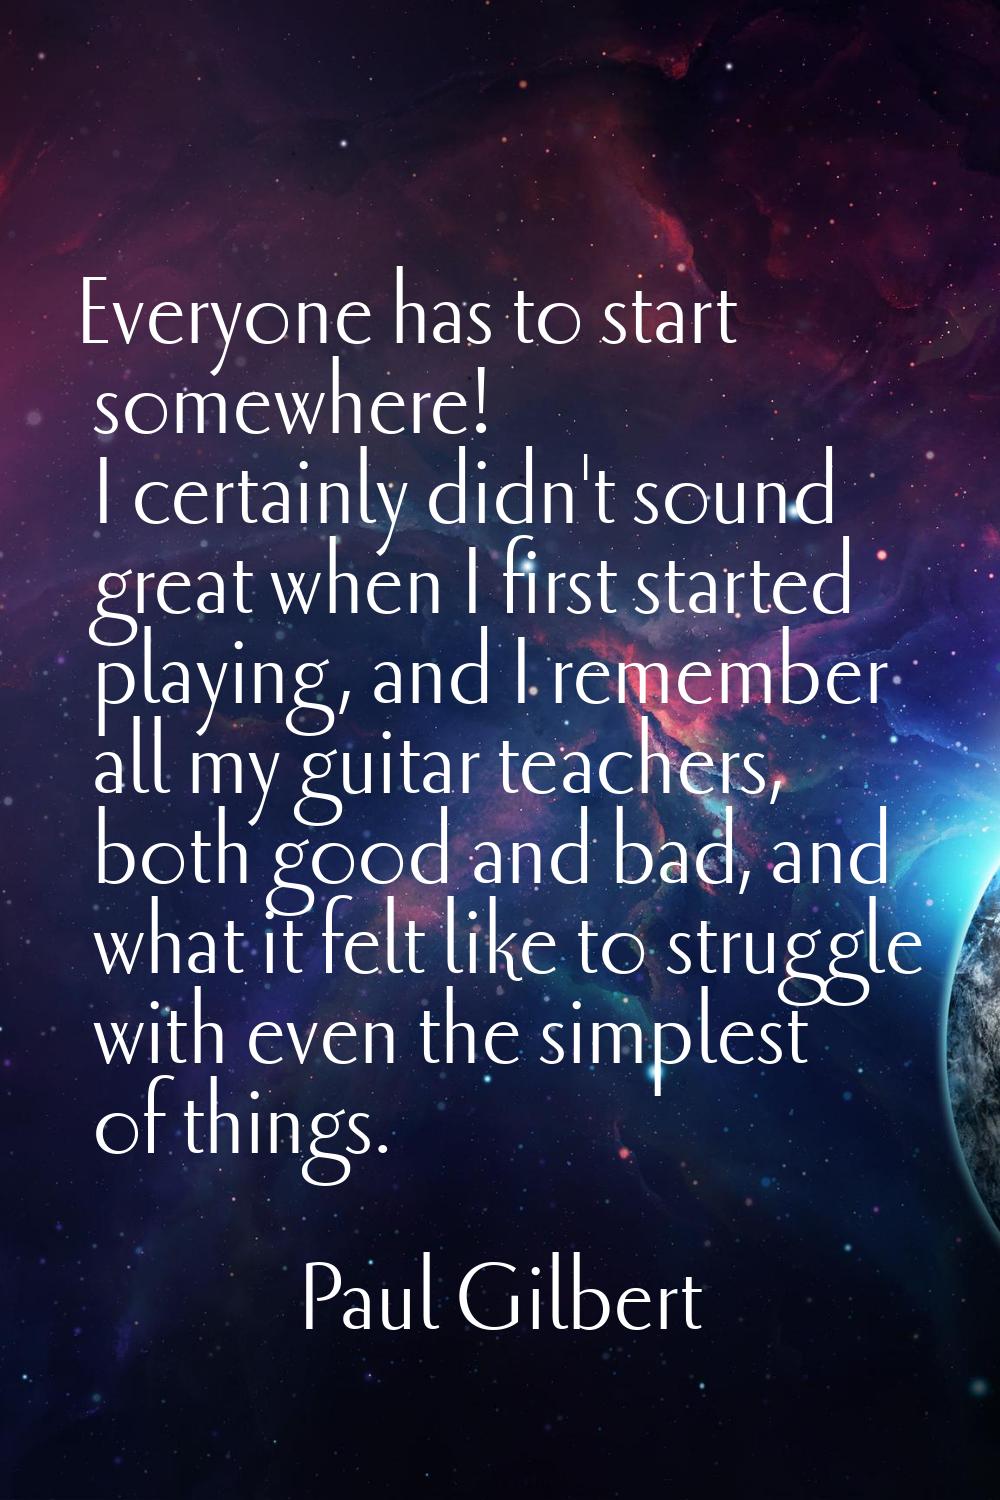 Everyone has to start somewhere! I certainly didn't sound great when I first started playing, and I